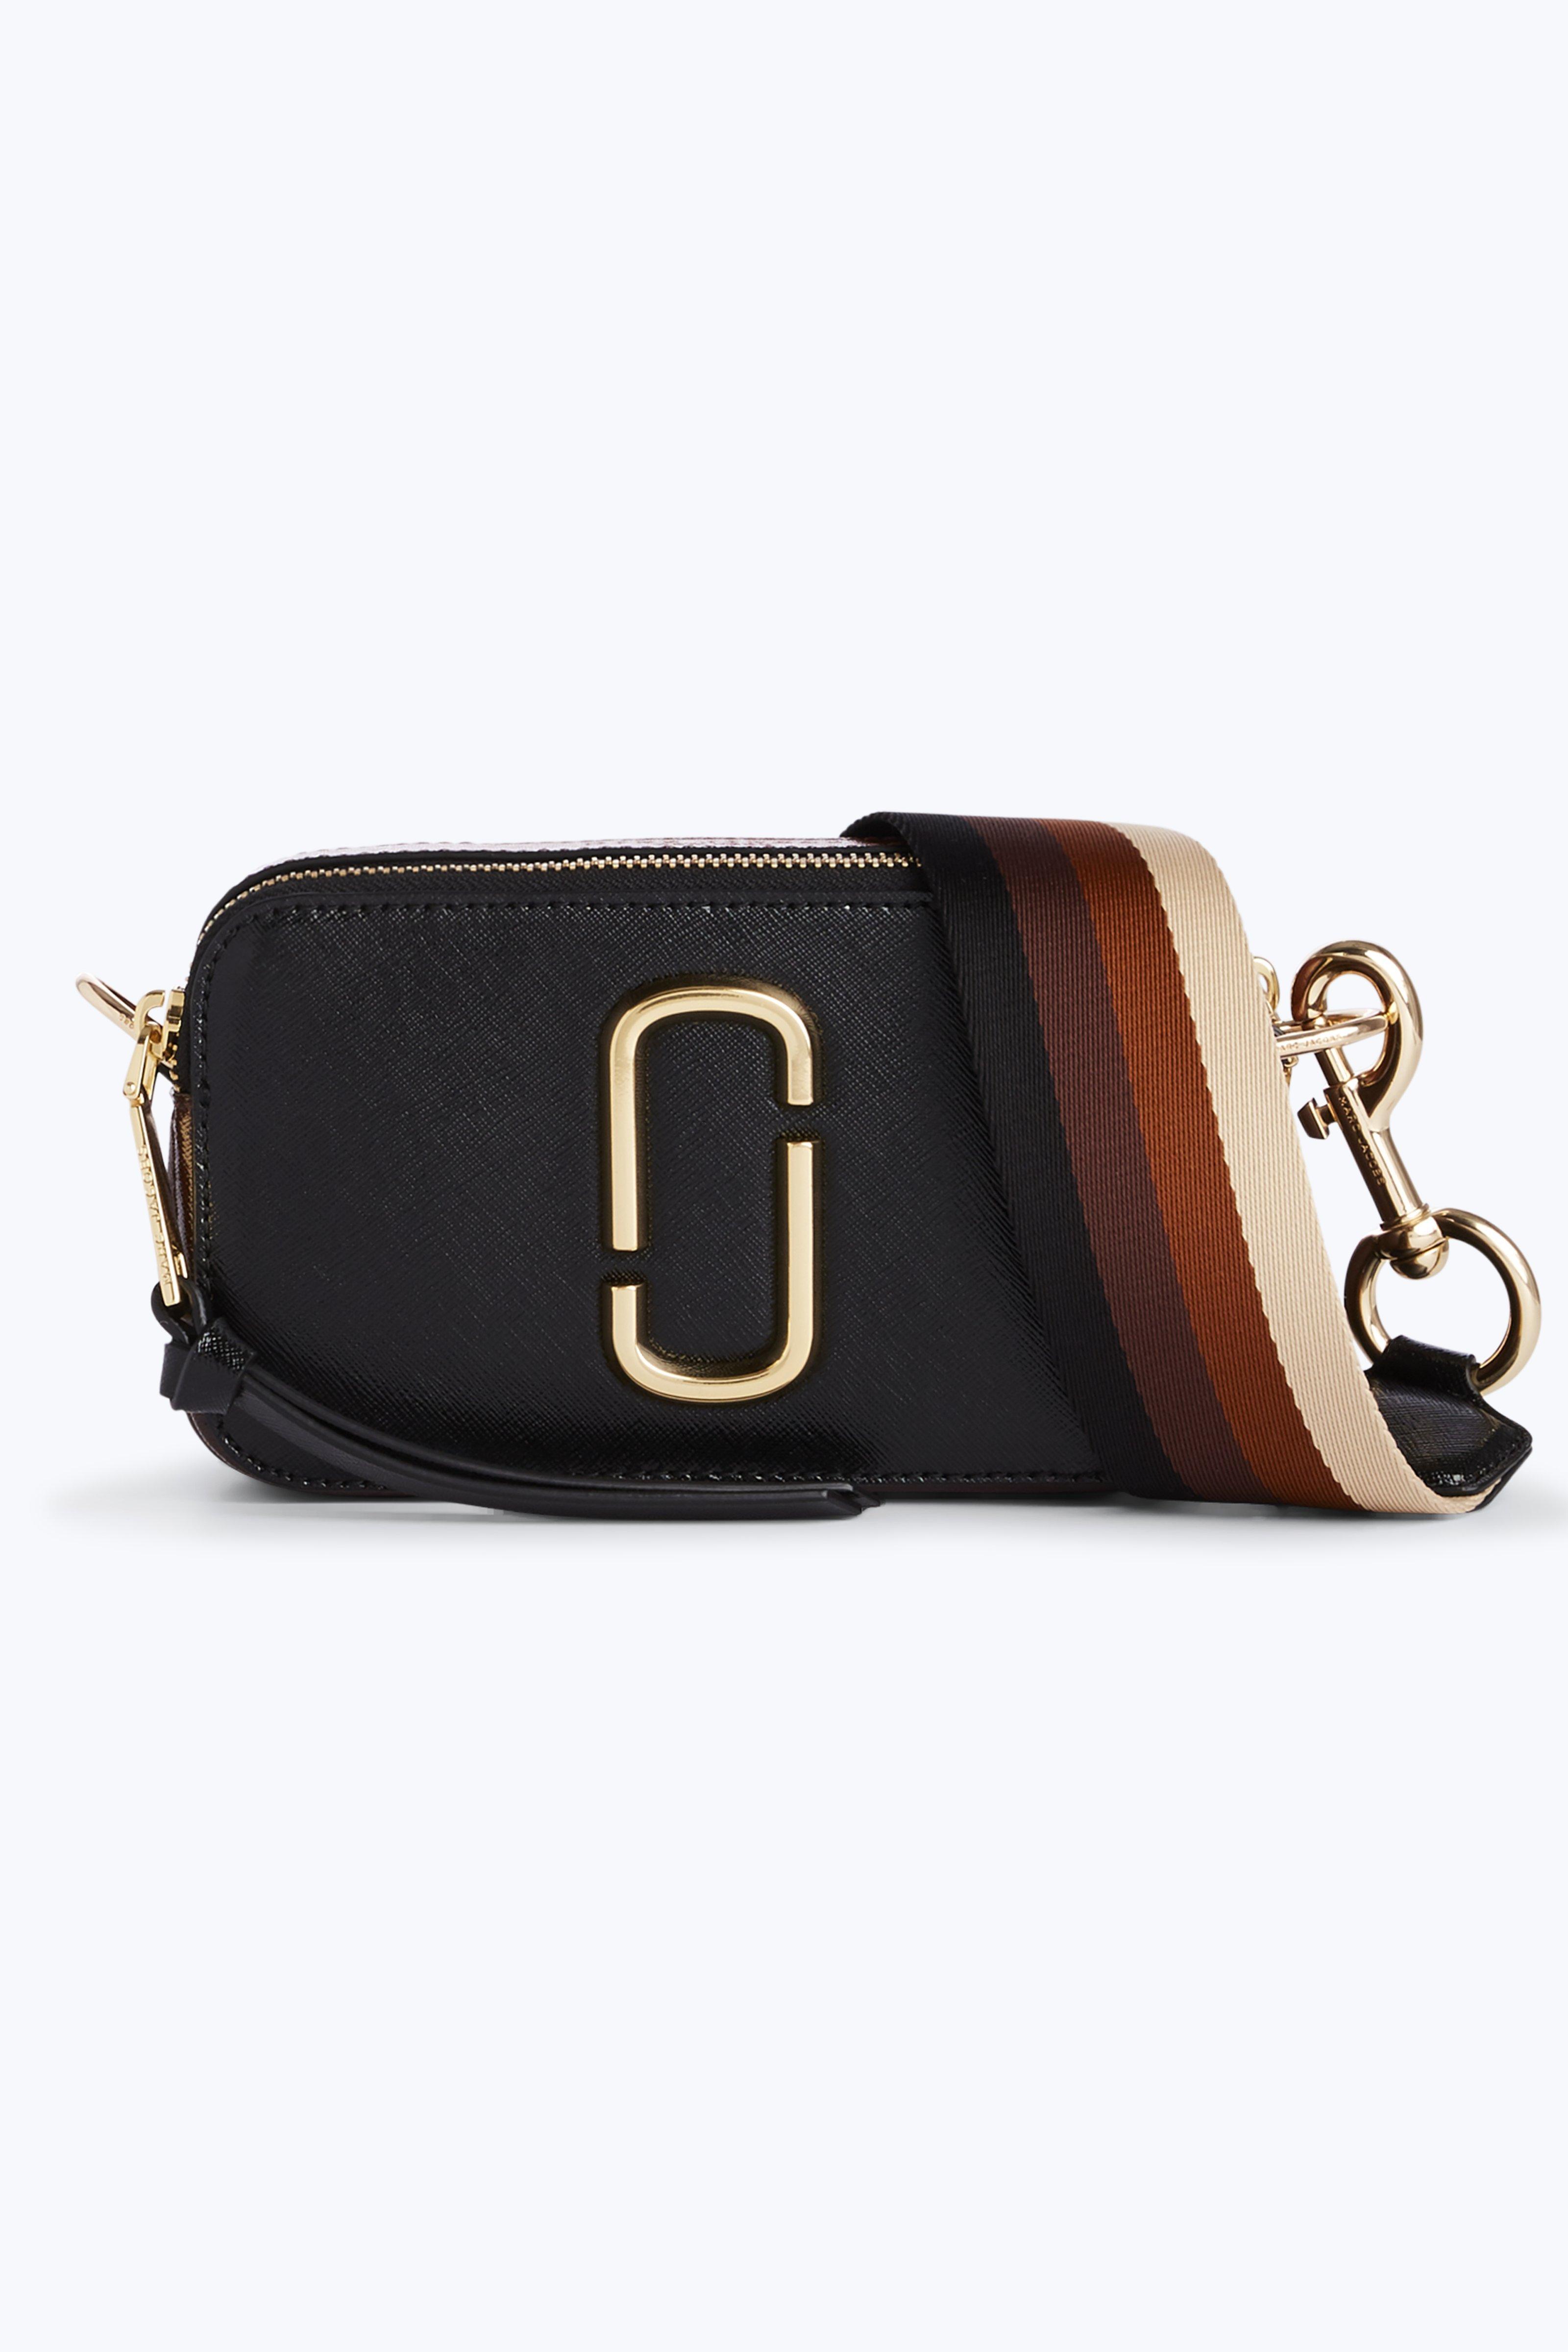 Marc jacobs Snapshot Small Camera Bag in Black | Lyst